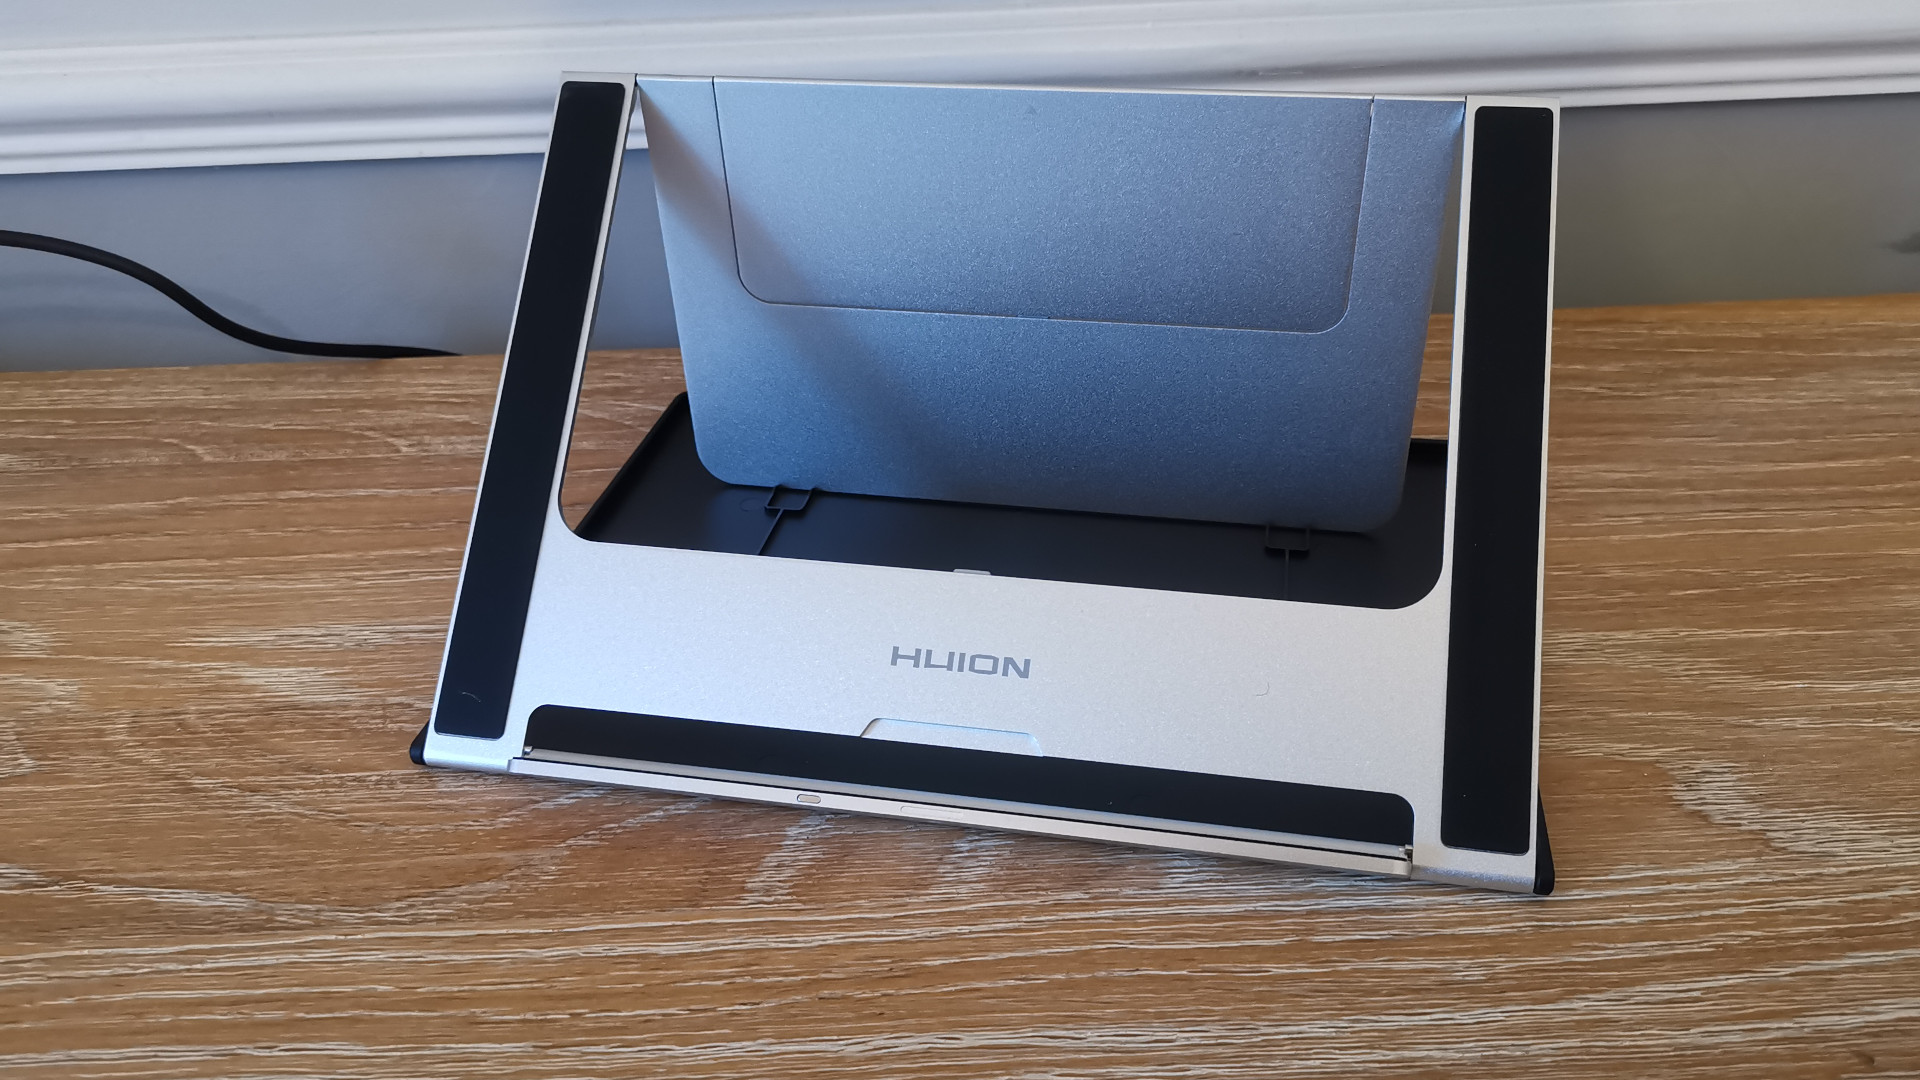 The stand that comes with the Huion Kamvas Pro 16